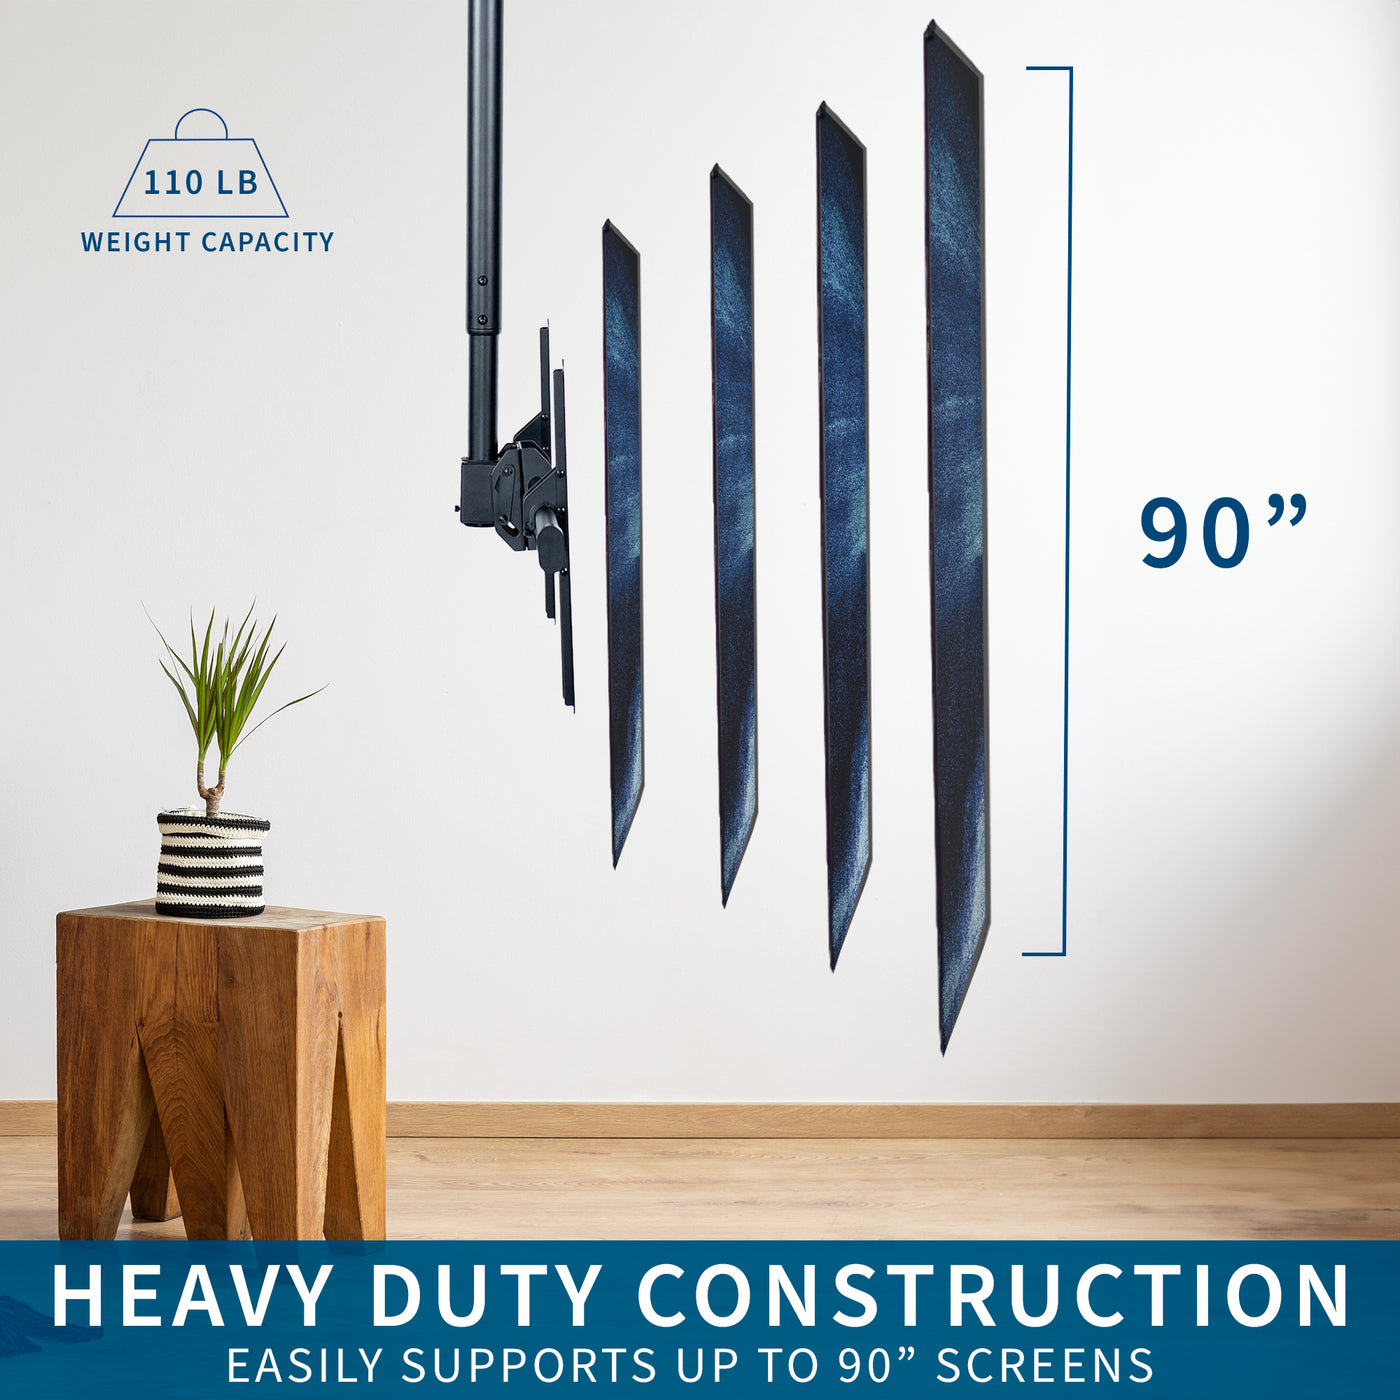 Large heavy-duty TV ceiling mount with height adjustable 5-foot extension pole with swivel and tilt and built-in cable management. Compatible with flat or sloped ceilings and wood, brick, and concrete mounting surfaces.